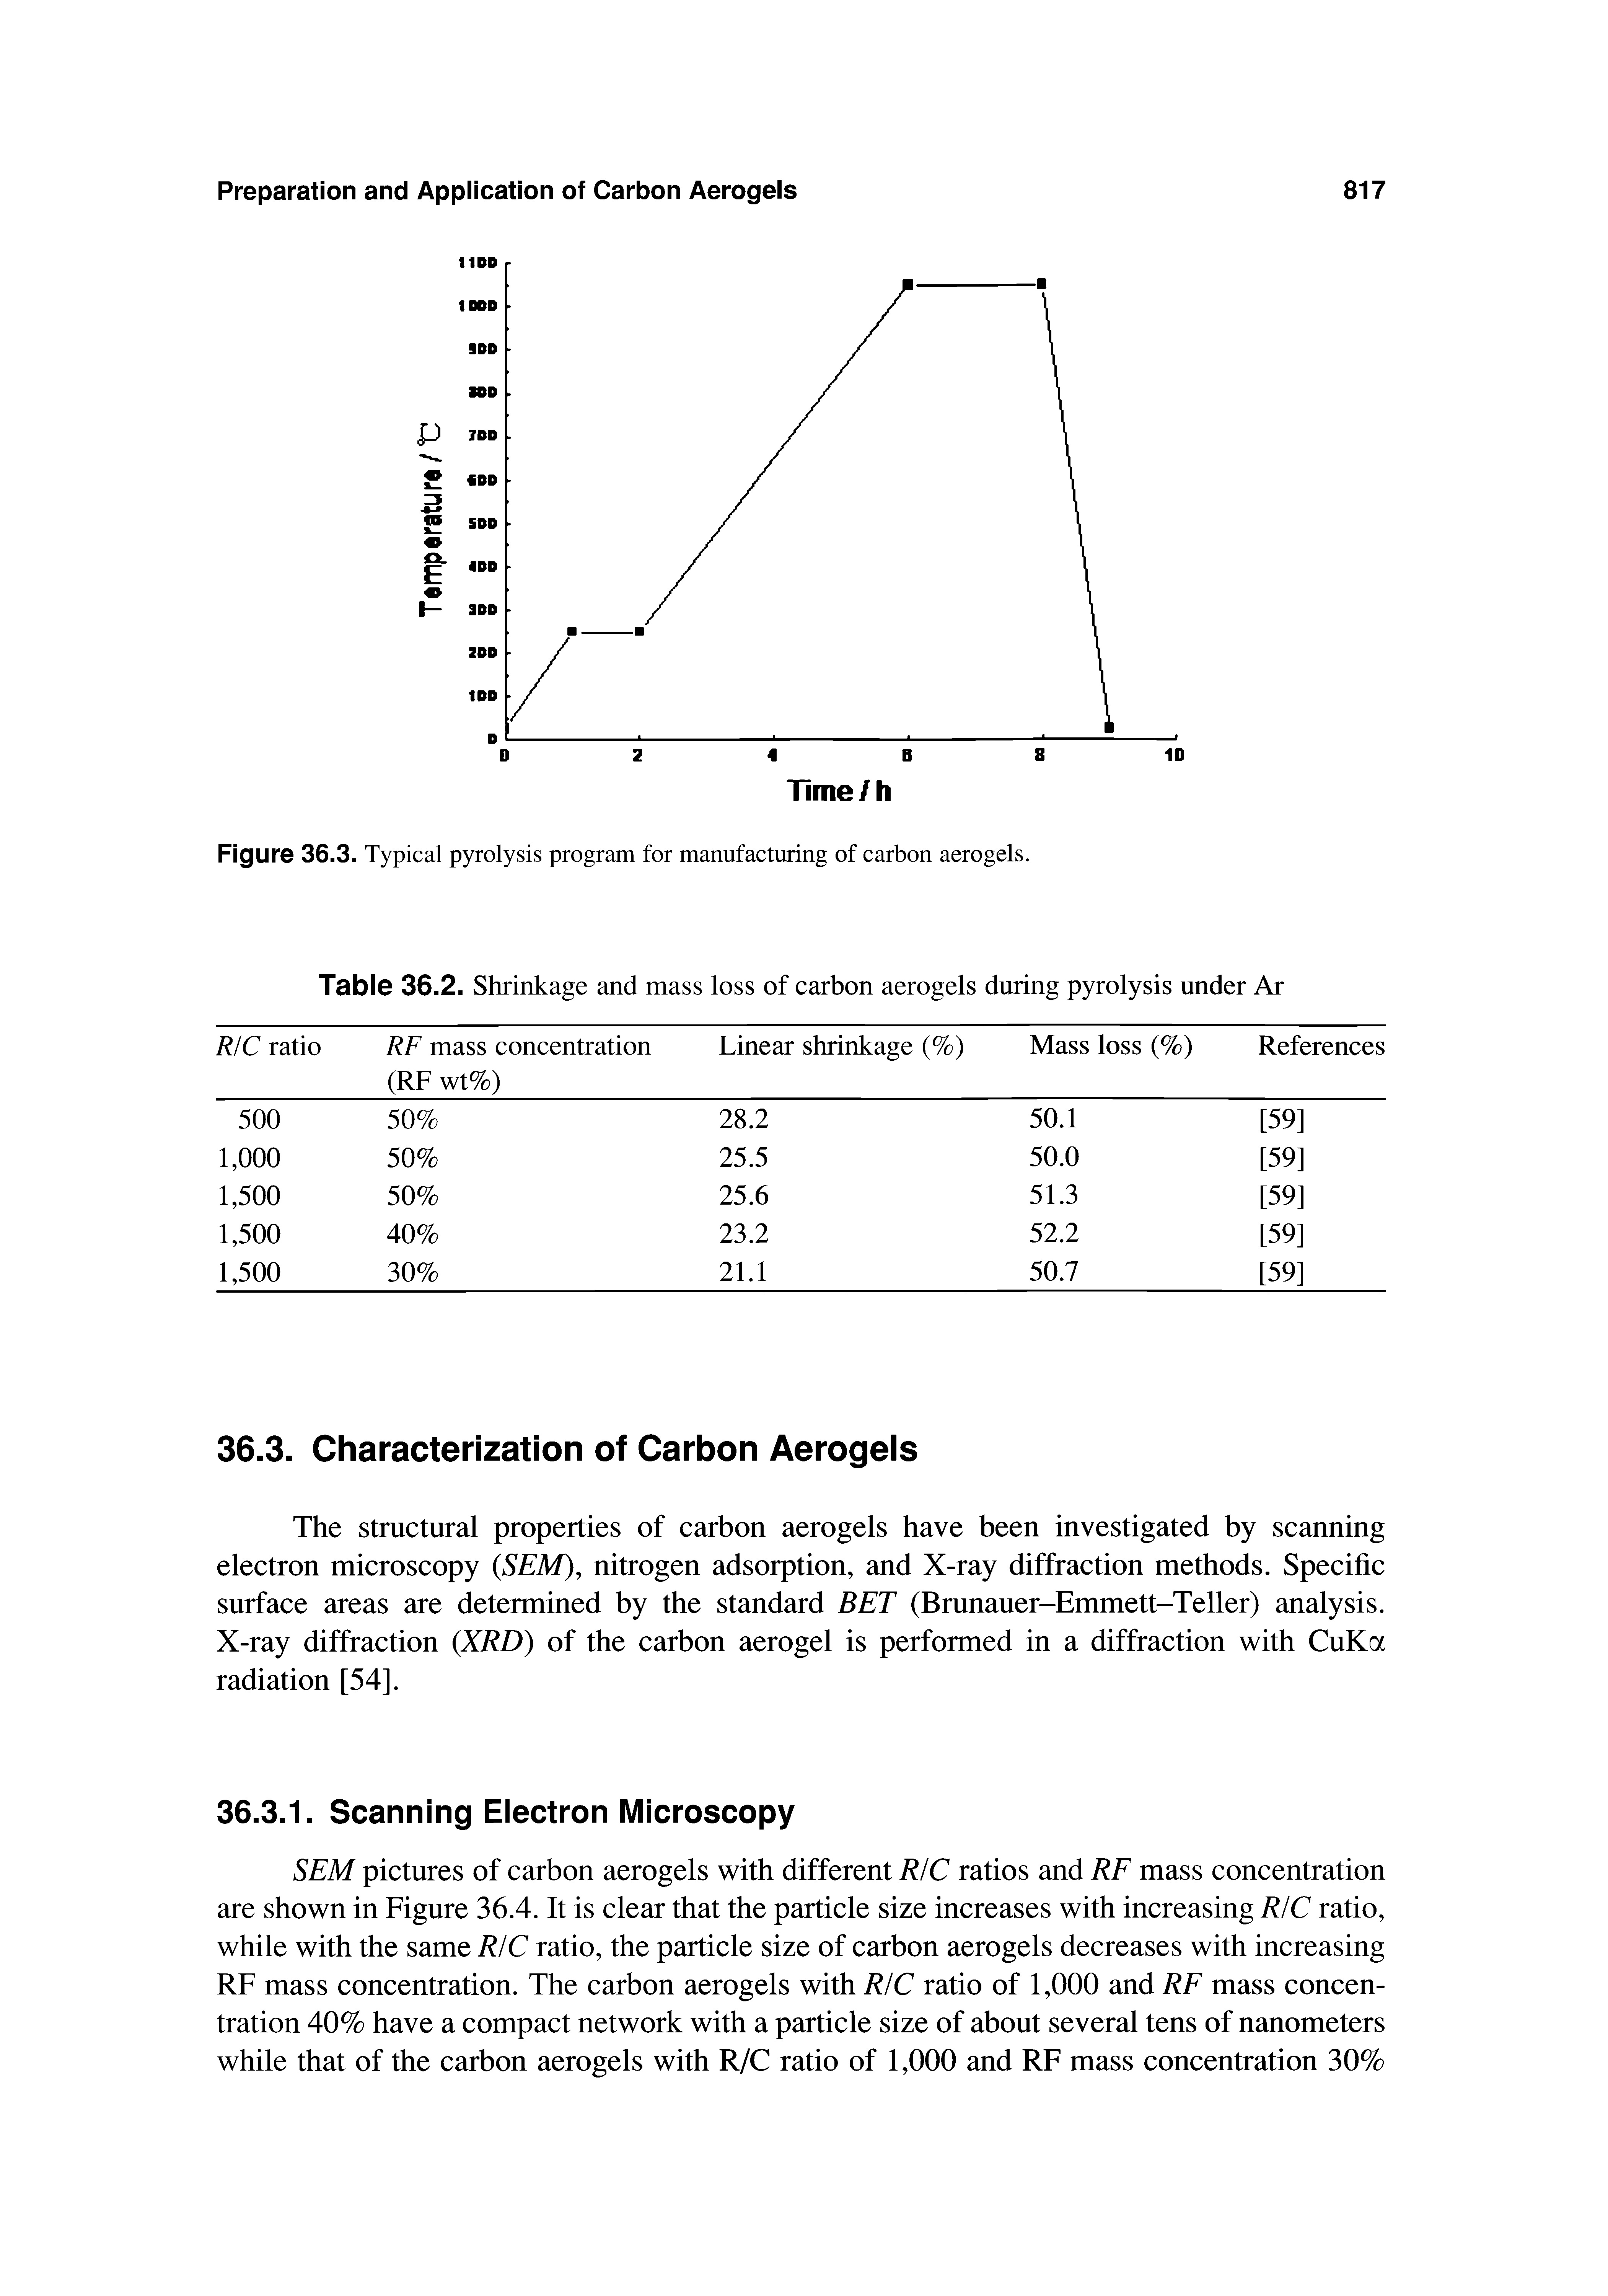 Figure 36.3. Typical pyrolysis program for manufacturing of carbon aerogels.